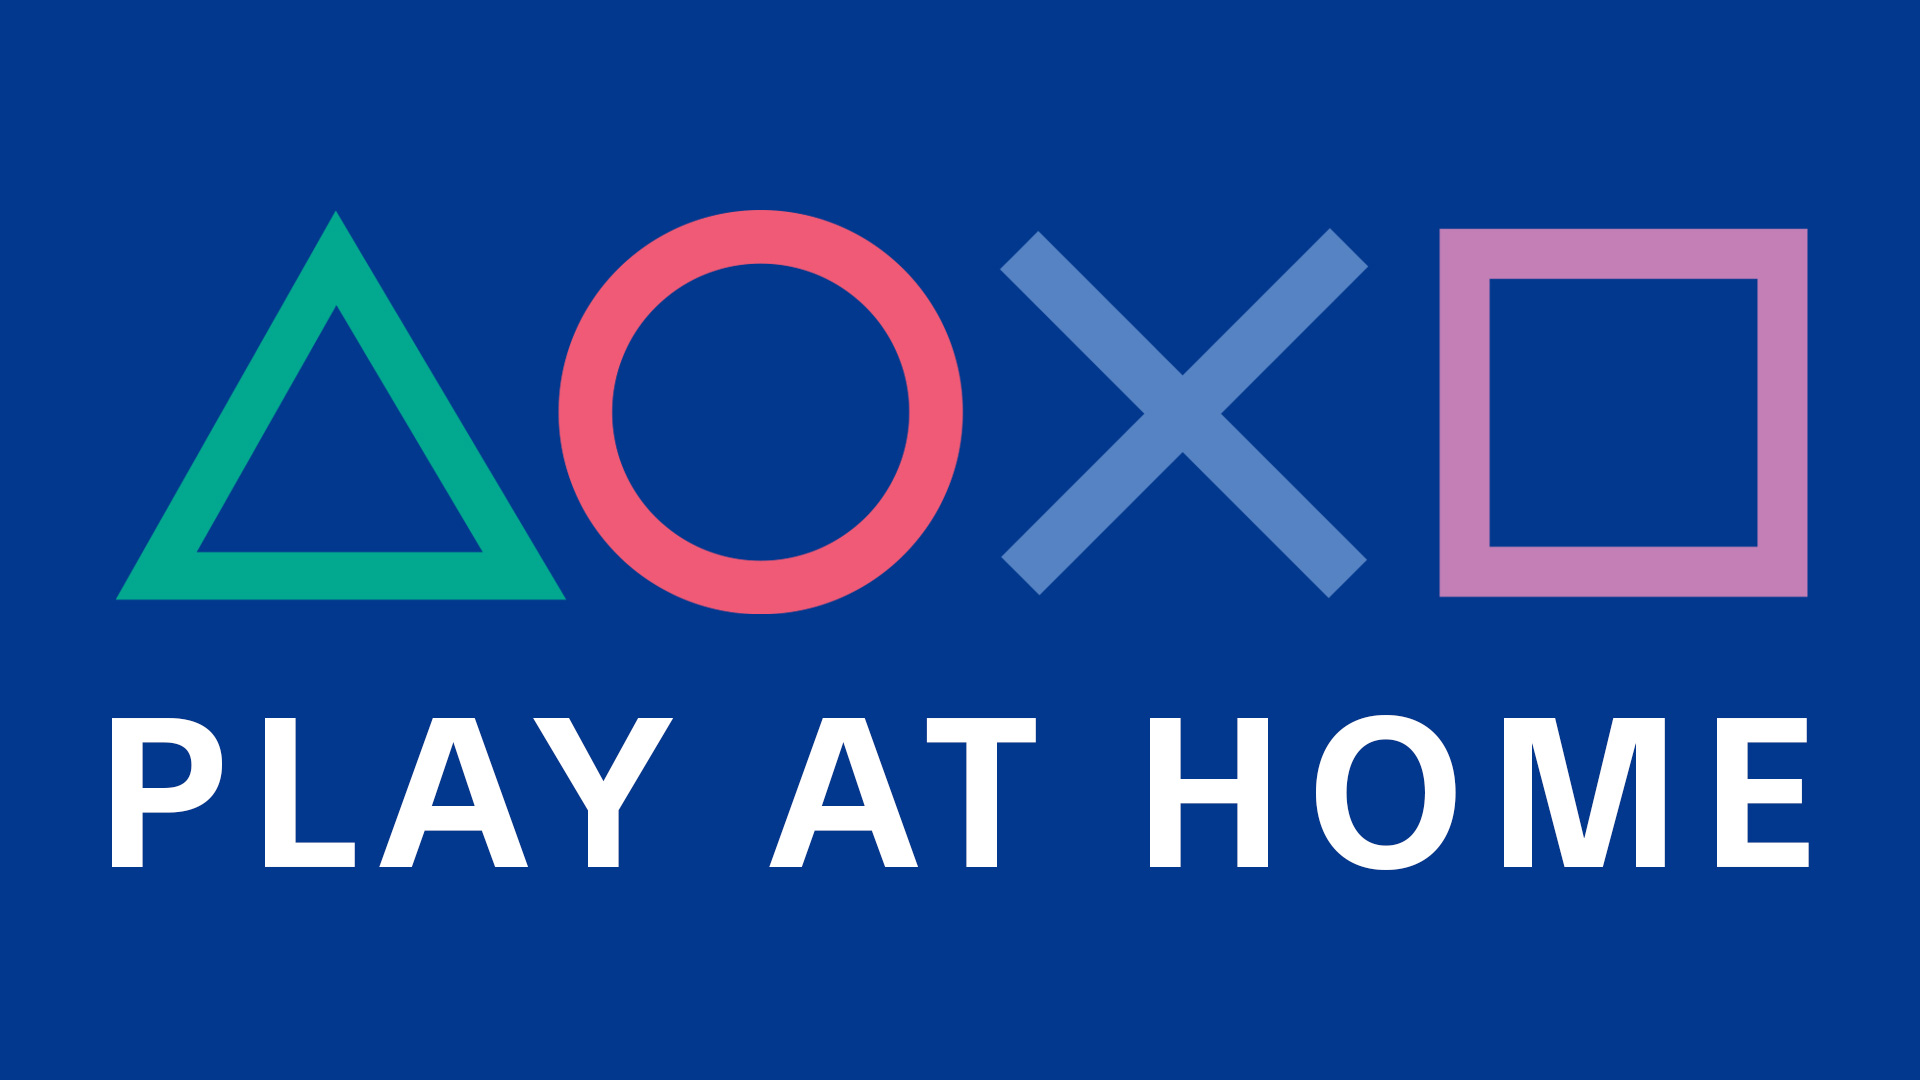 Play At Home logo underneath the PlayStation shapes